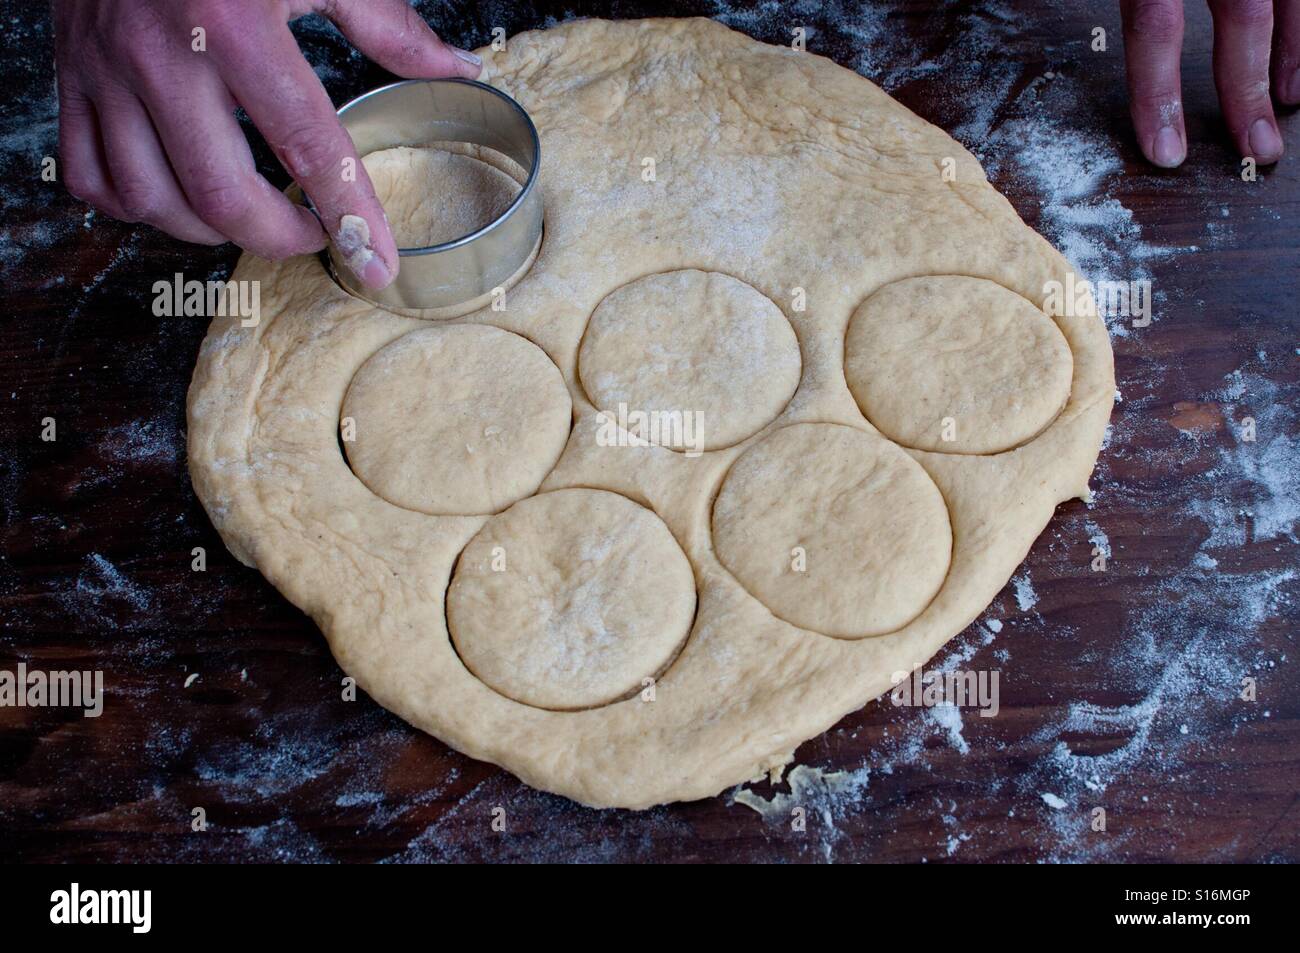 Cutting circles in pastry for doughnuts Stock Photo